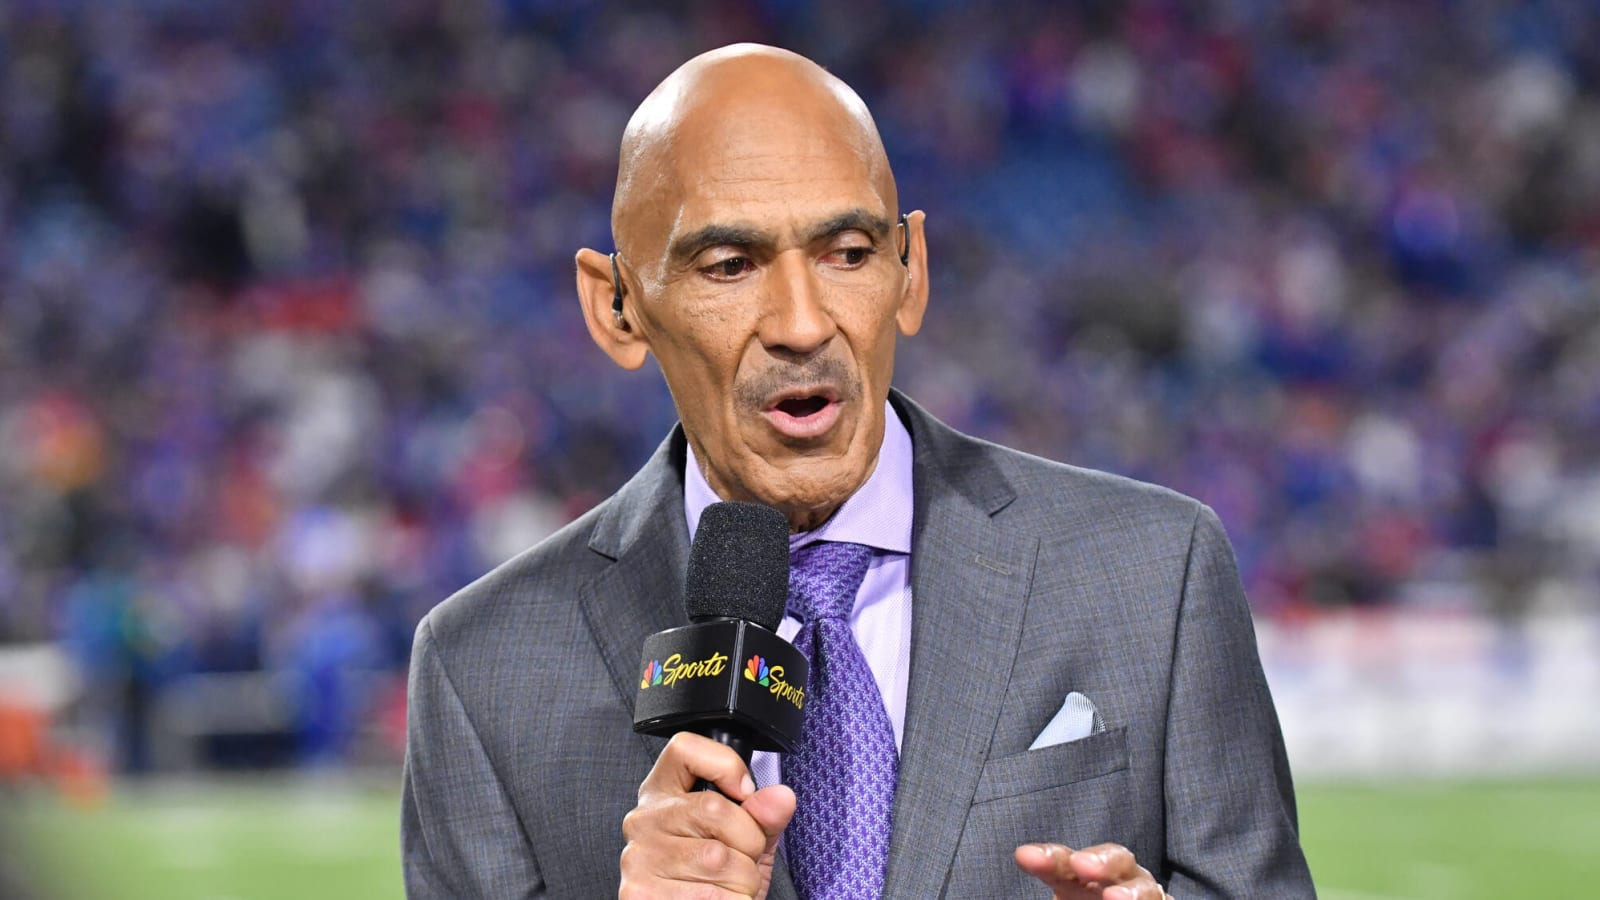 Is Something Amiss With Tony Dungy’s Latest Apology?